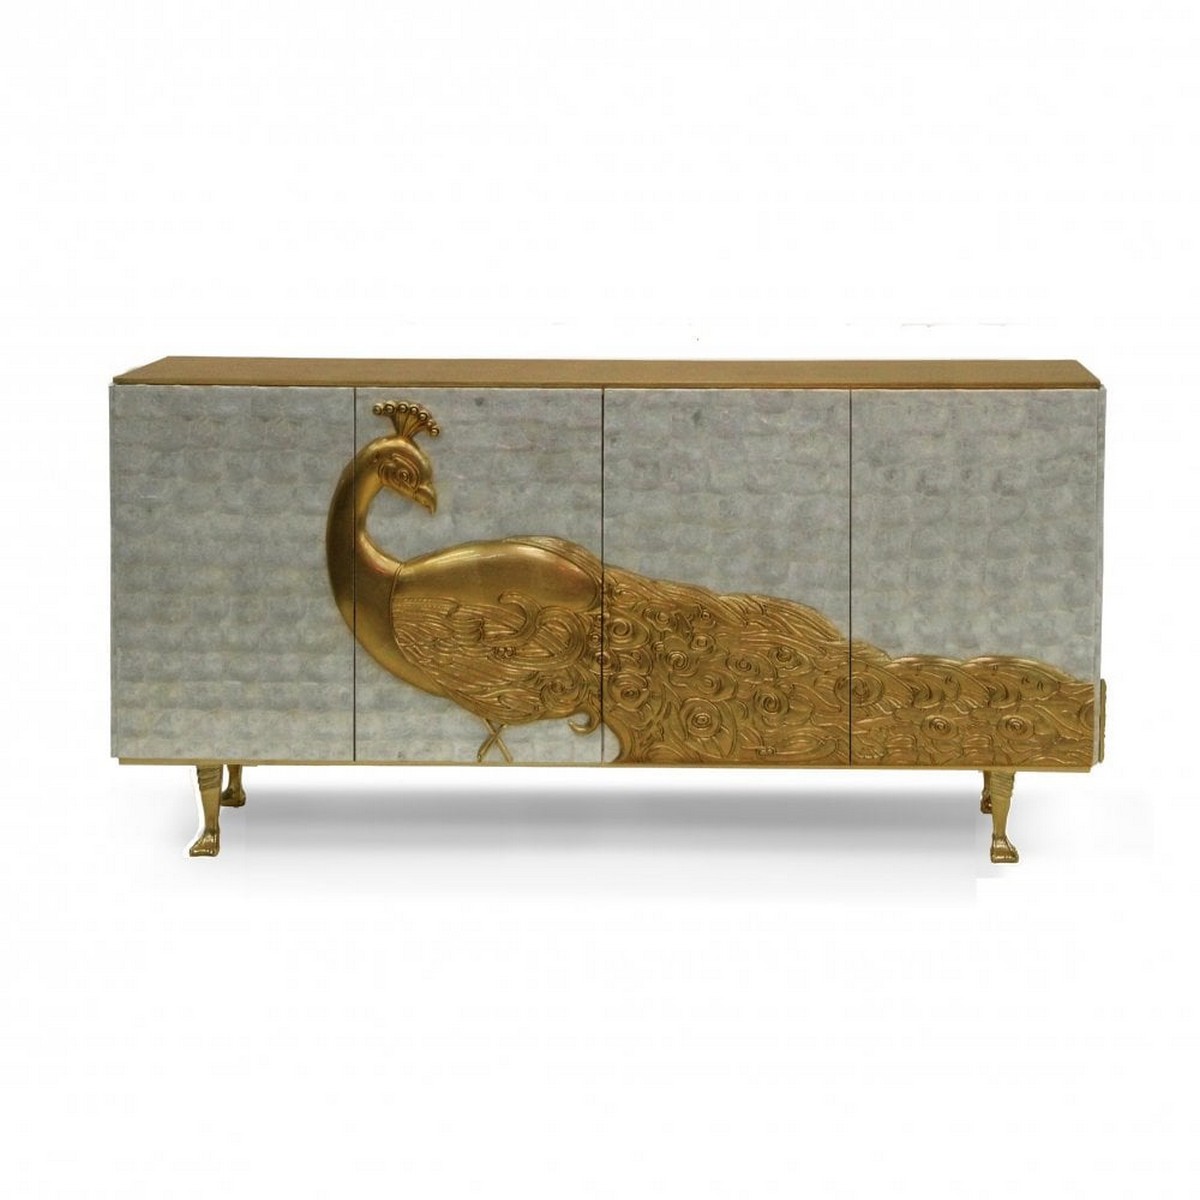 Covet House Stocklist: New Sideboard Entries